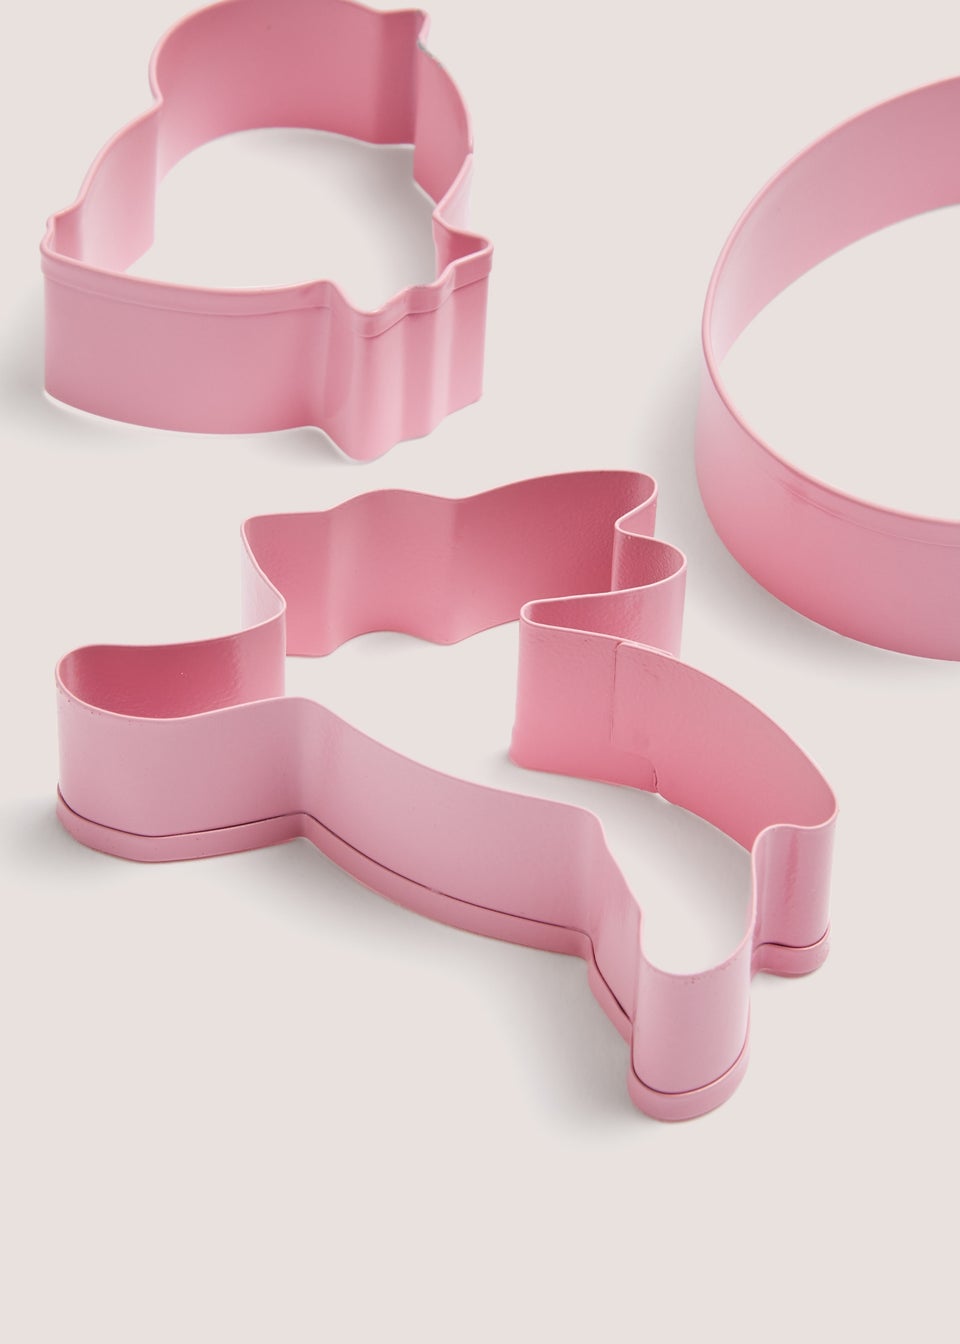 3 Pack Easter Cookie Cutter Set (9cm x 9cm)